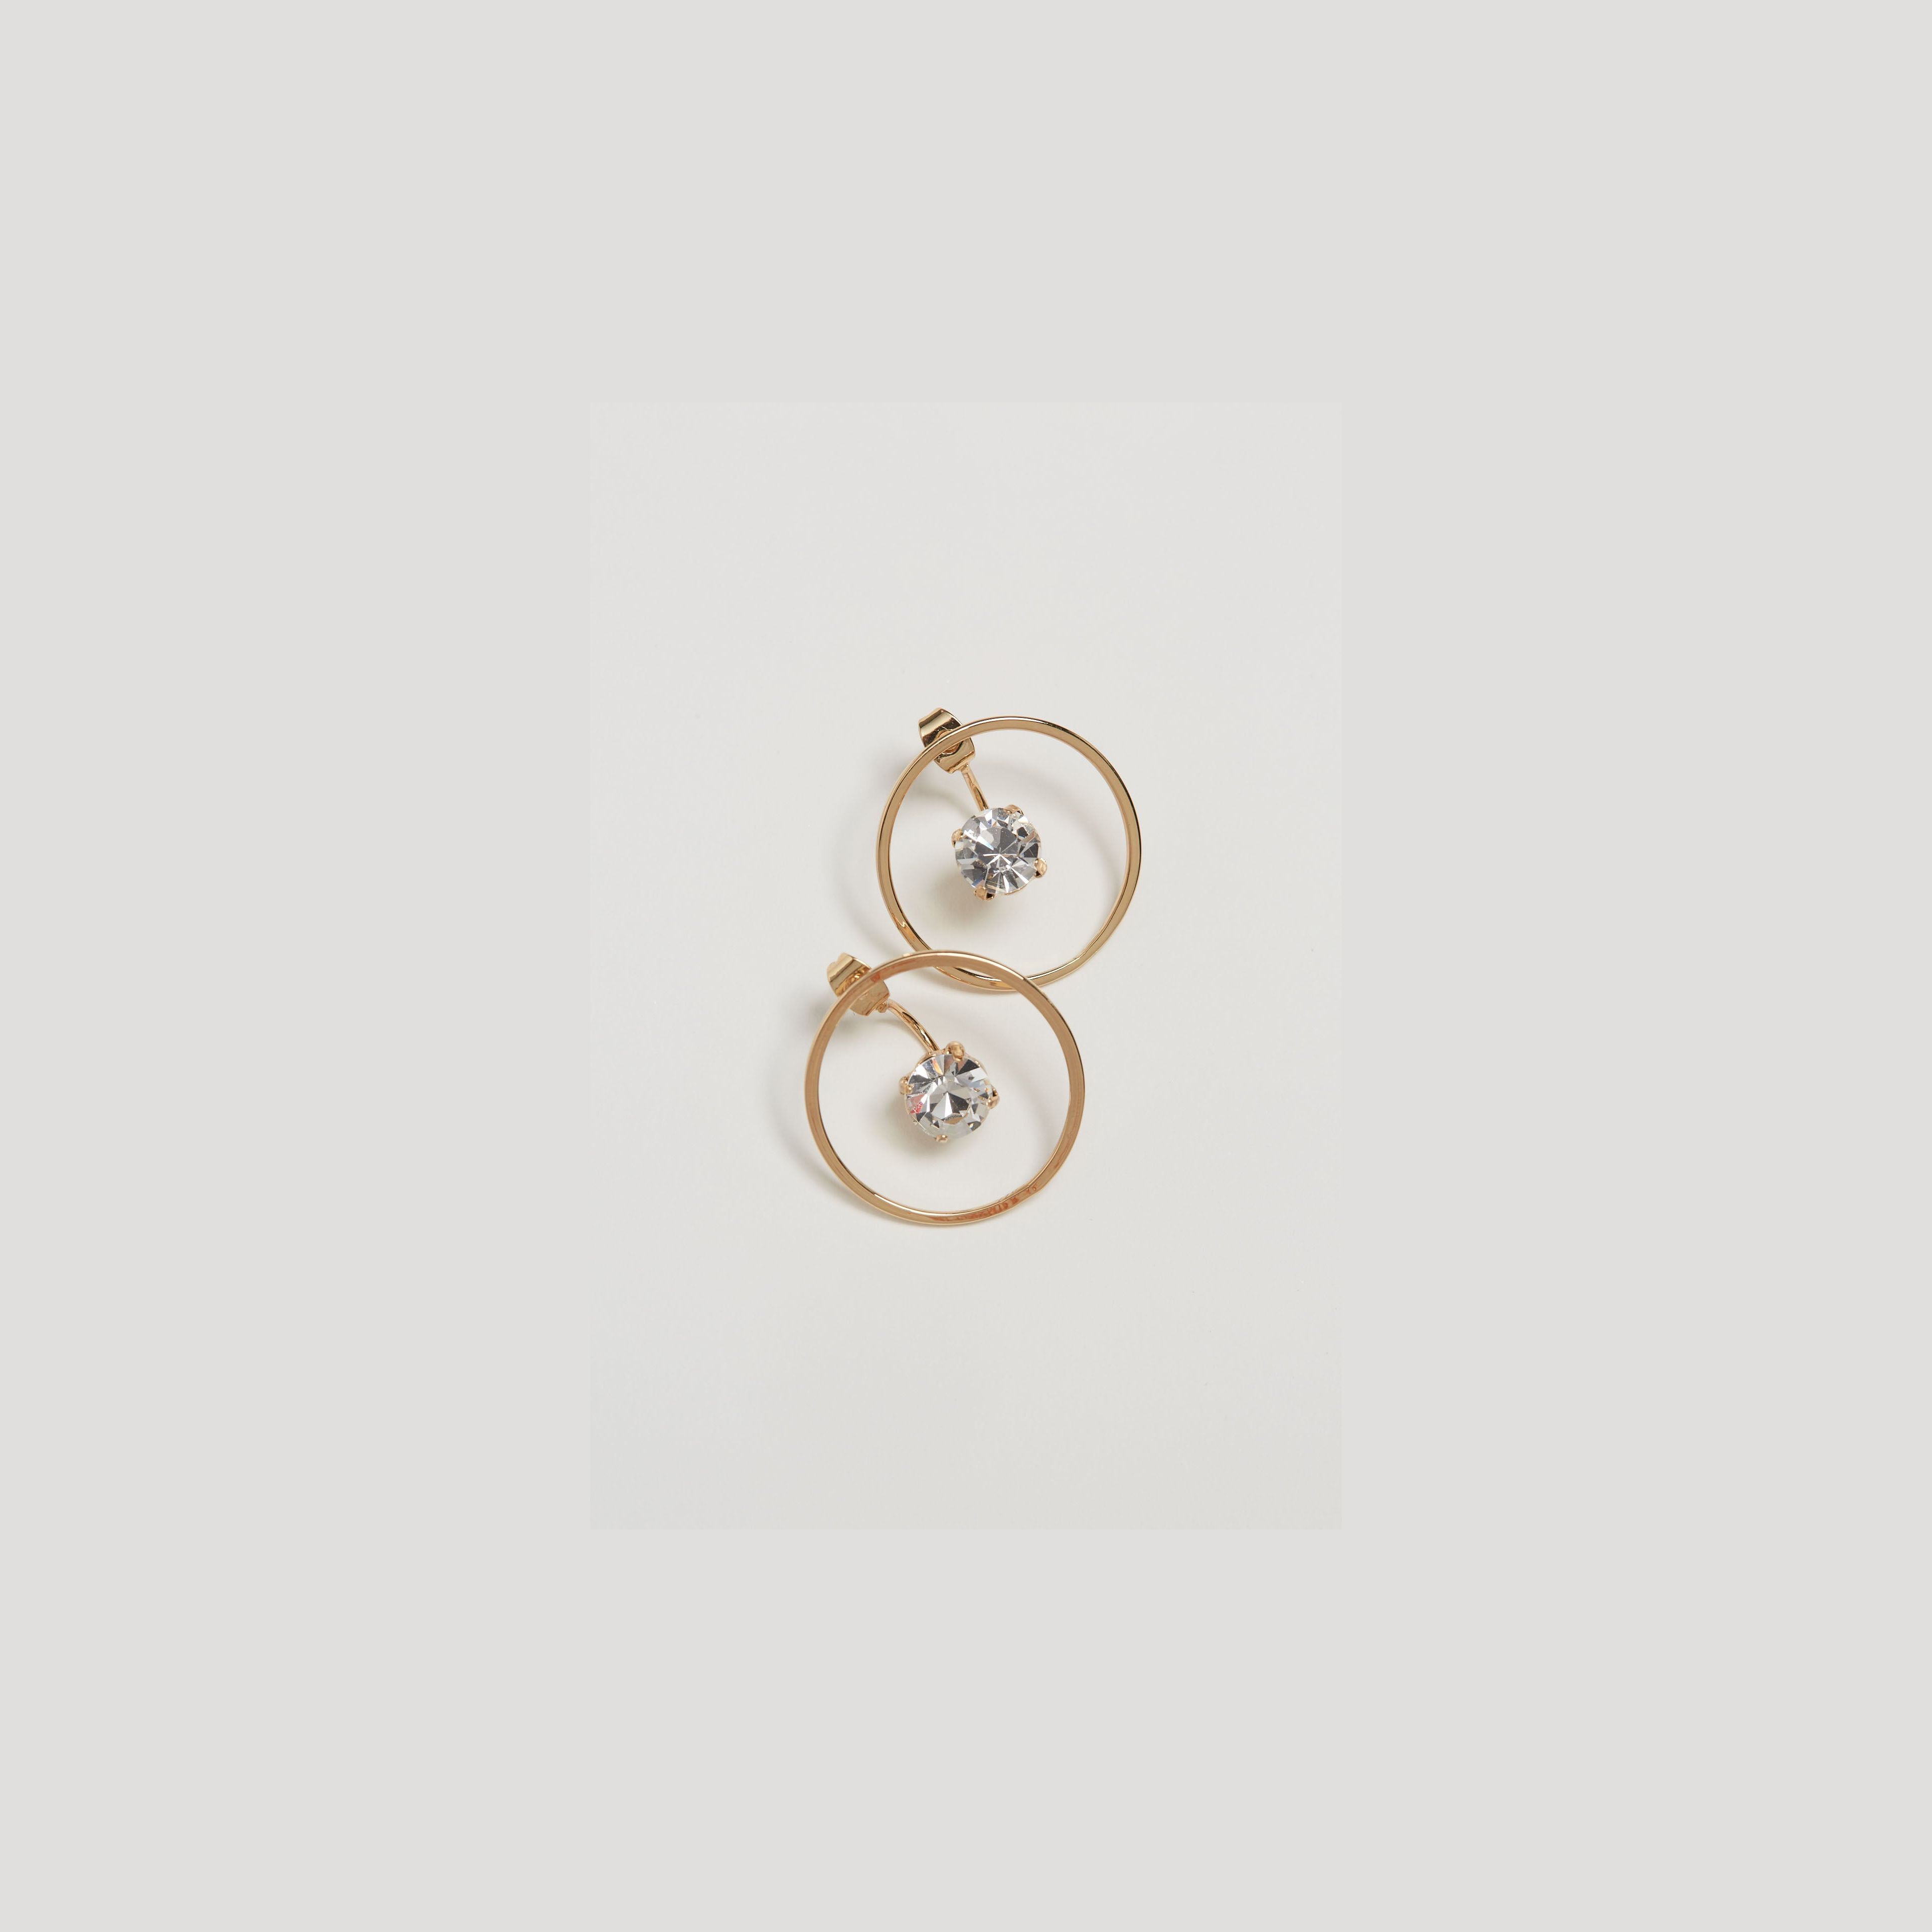 The Trapeze Earring